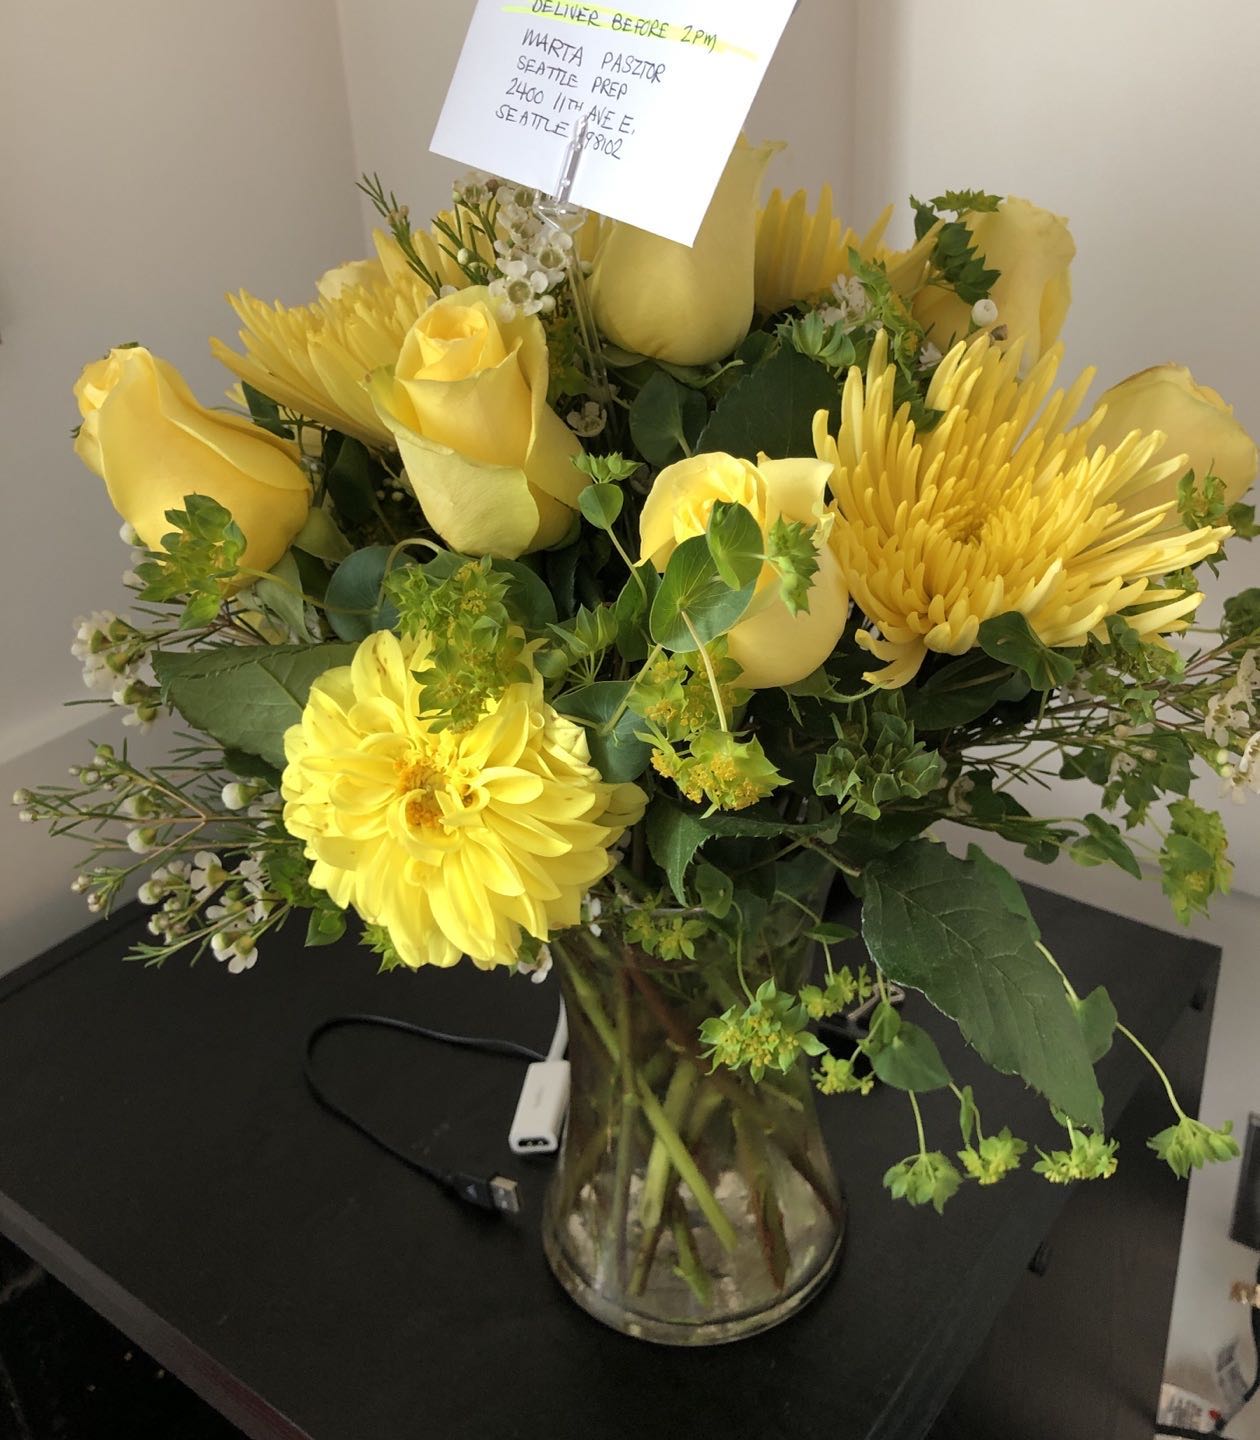 A surprise bouquet delivered to me in the middle of my Calculus class on the first day of school. Yes, my students wanted to know who sent it. Guess what? I have a loving husband who knows how to mark the beginning of my 26th year in teaching in America and the 45th of my career.
-
-
#celebration #surprise #teaching #newschoolyear #teachingcareer #iloveteaching #bouquet #flowers #firtsdayofschool2022 #surpriseflowers #backtoschool #tanítás #újiskolaév #újtanév #virágcsokor #meglepetés